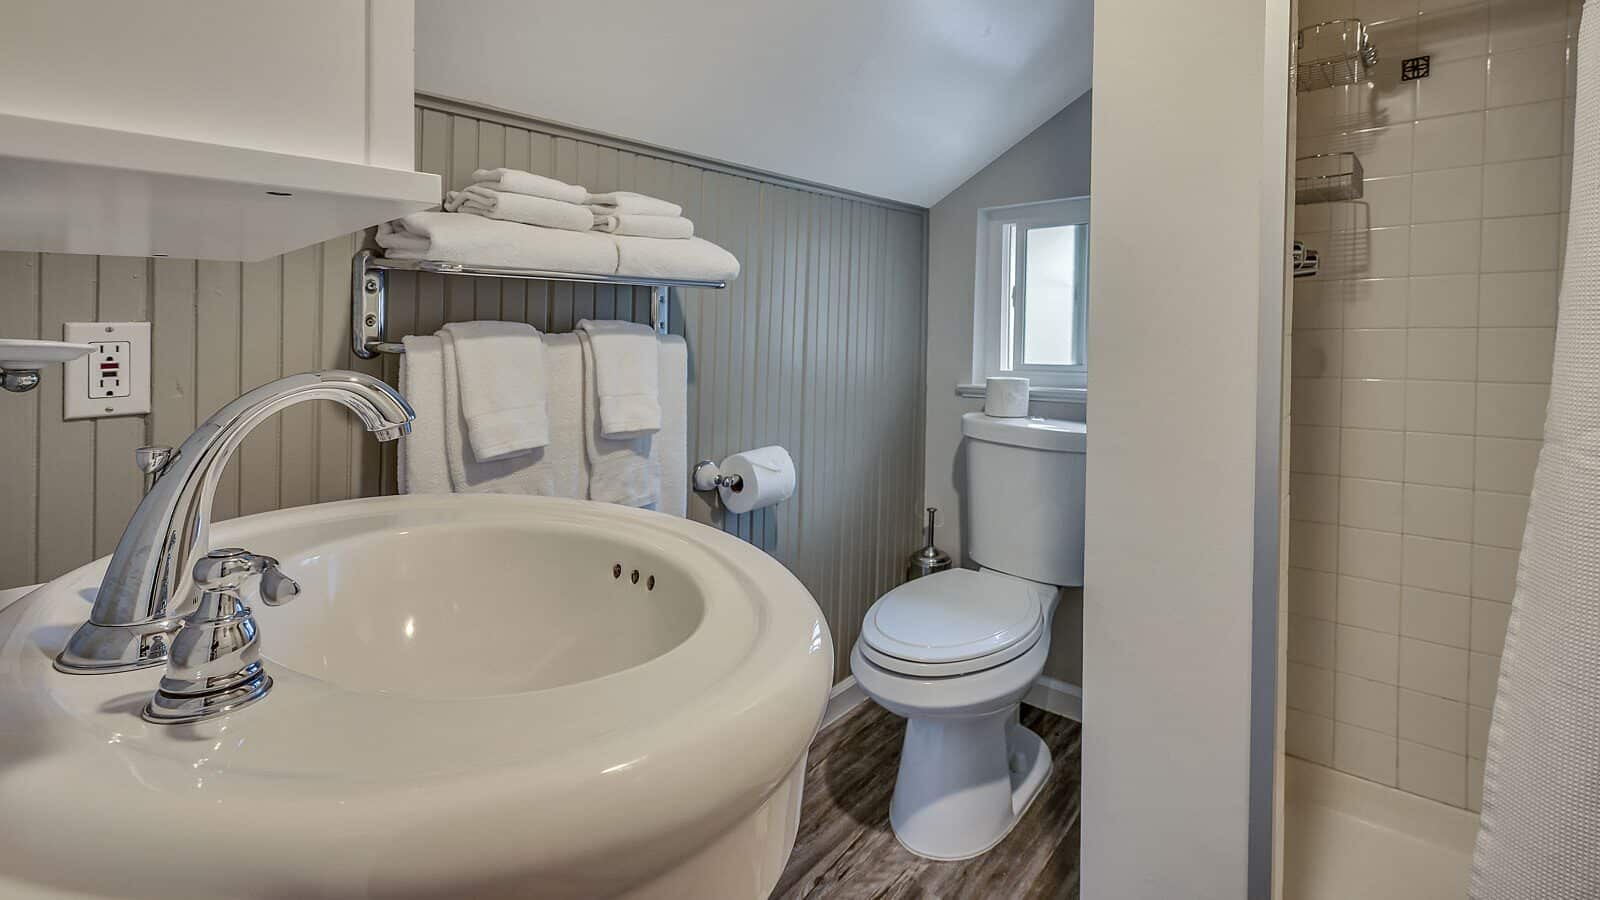 Bathroom with gray and white walls, stand up shower, white toilet, and white sink